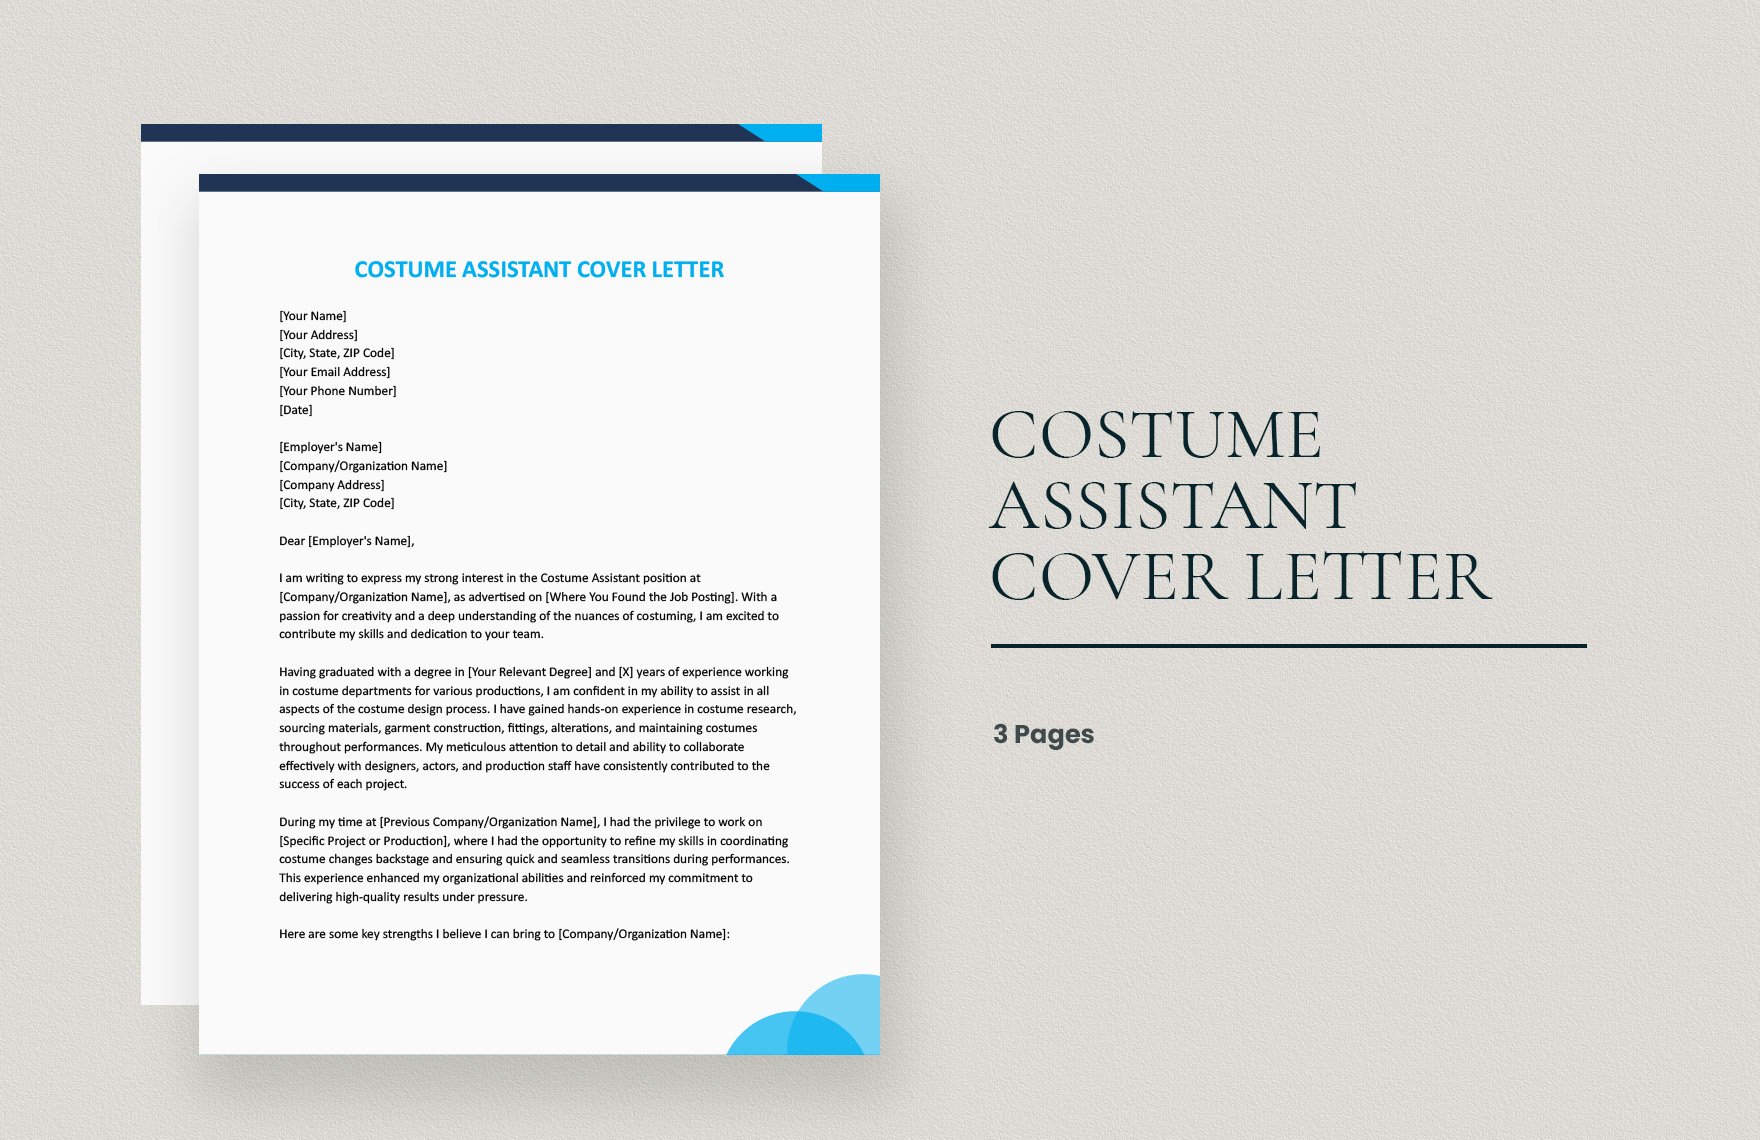 Costume Assistant Cover Letter